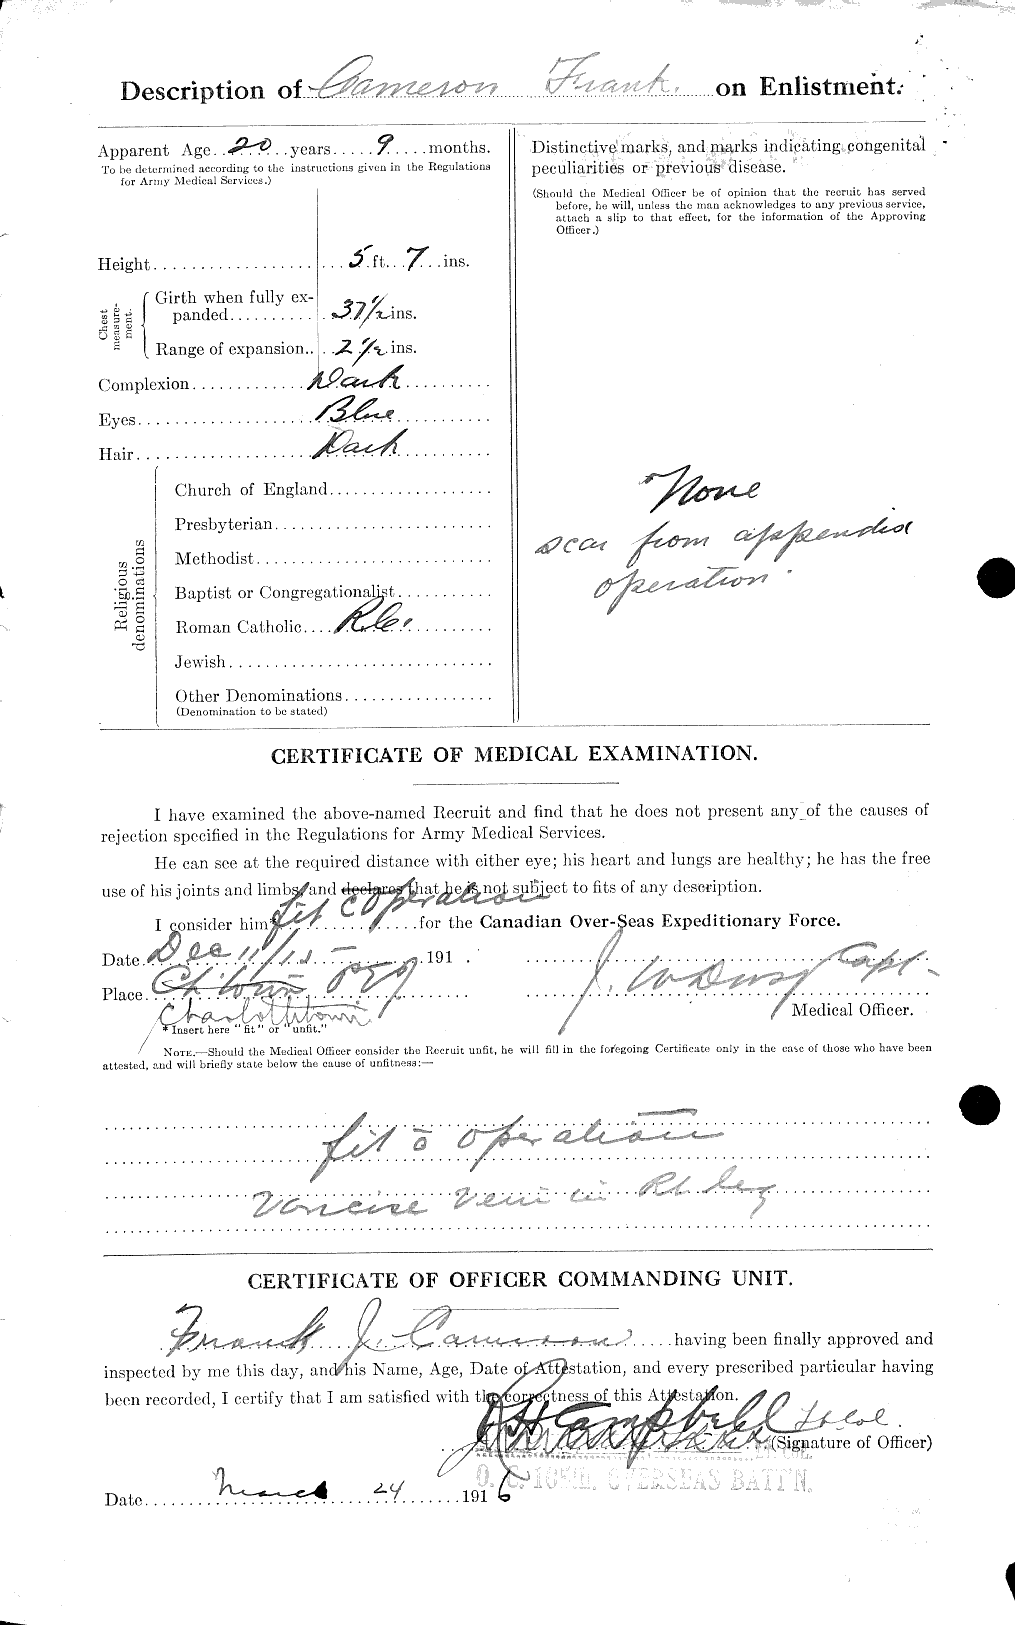 Personnel Records of the First World War - CEF 006550b